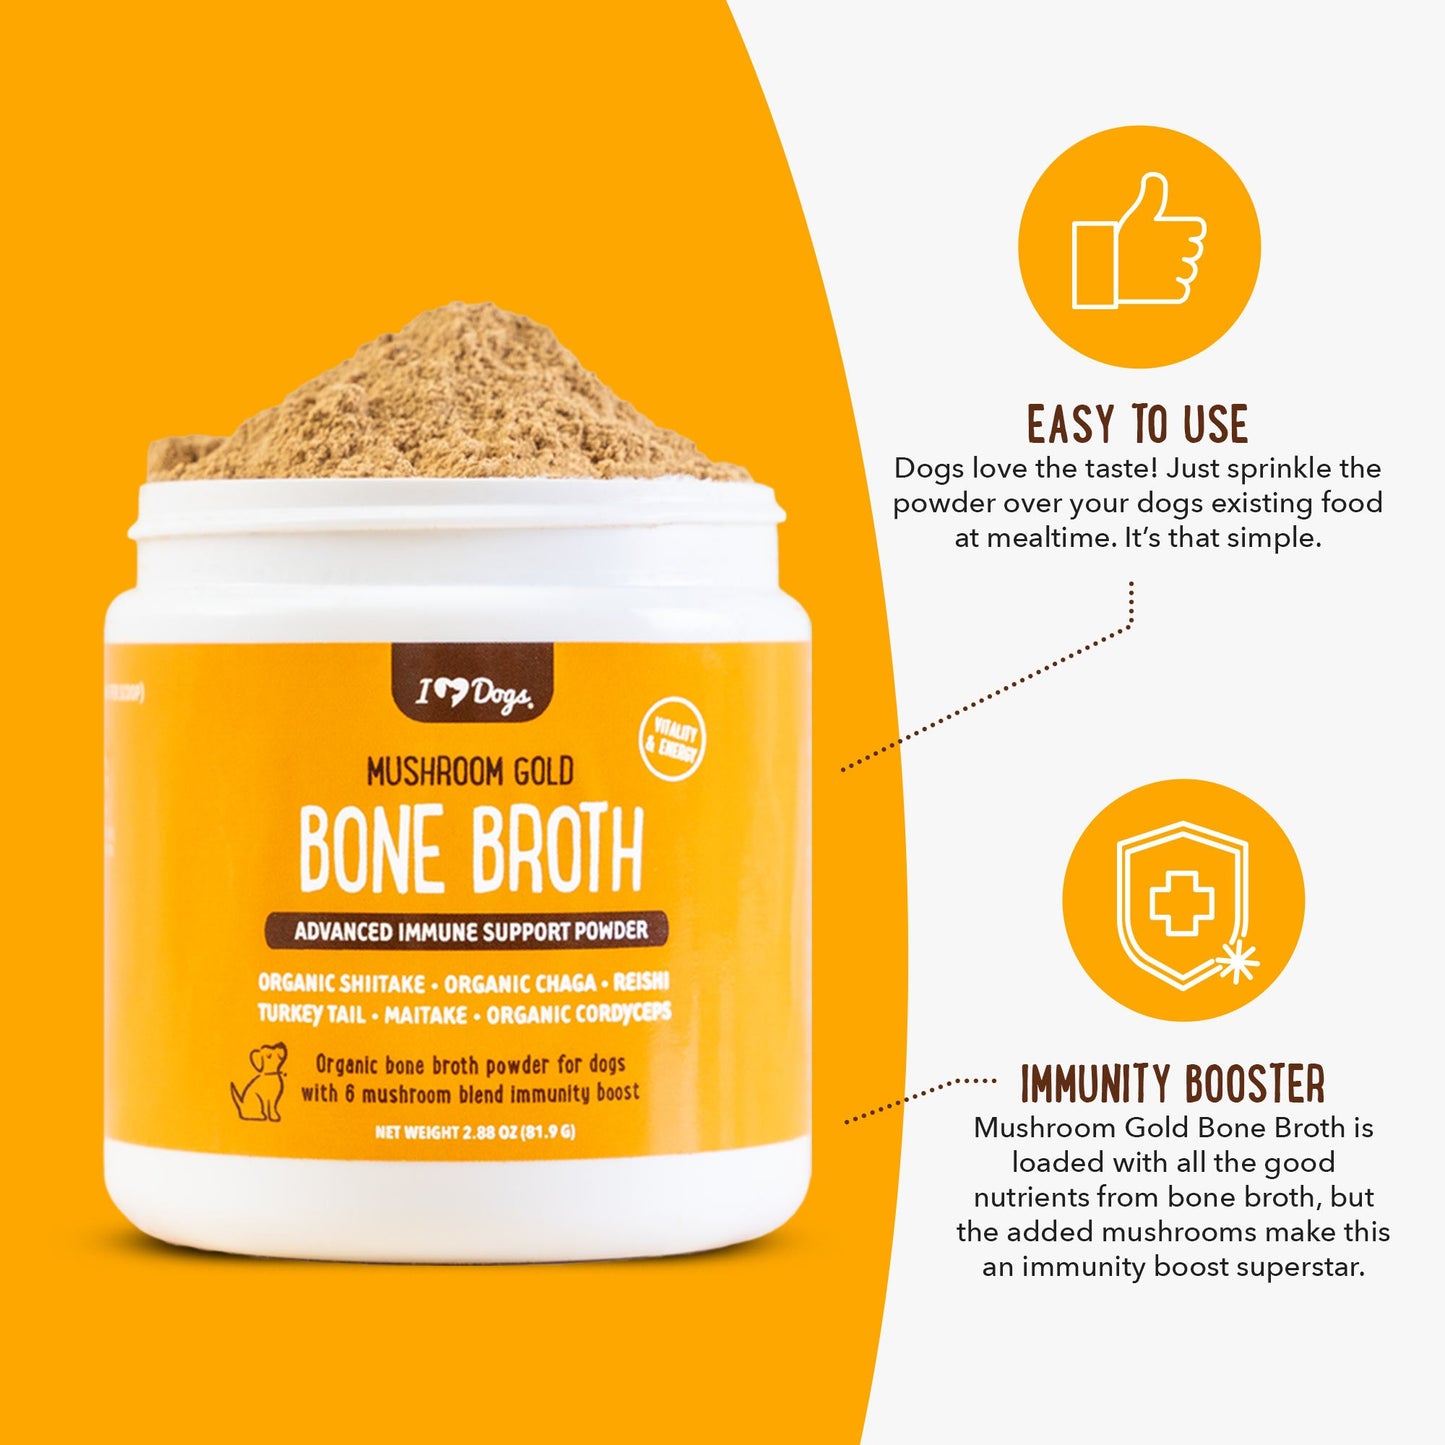 BUY 2 BAGS AND SAVE Mushroom Bone Broth For Dogs Immune Support Powder